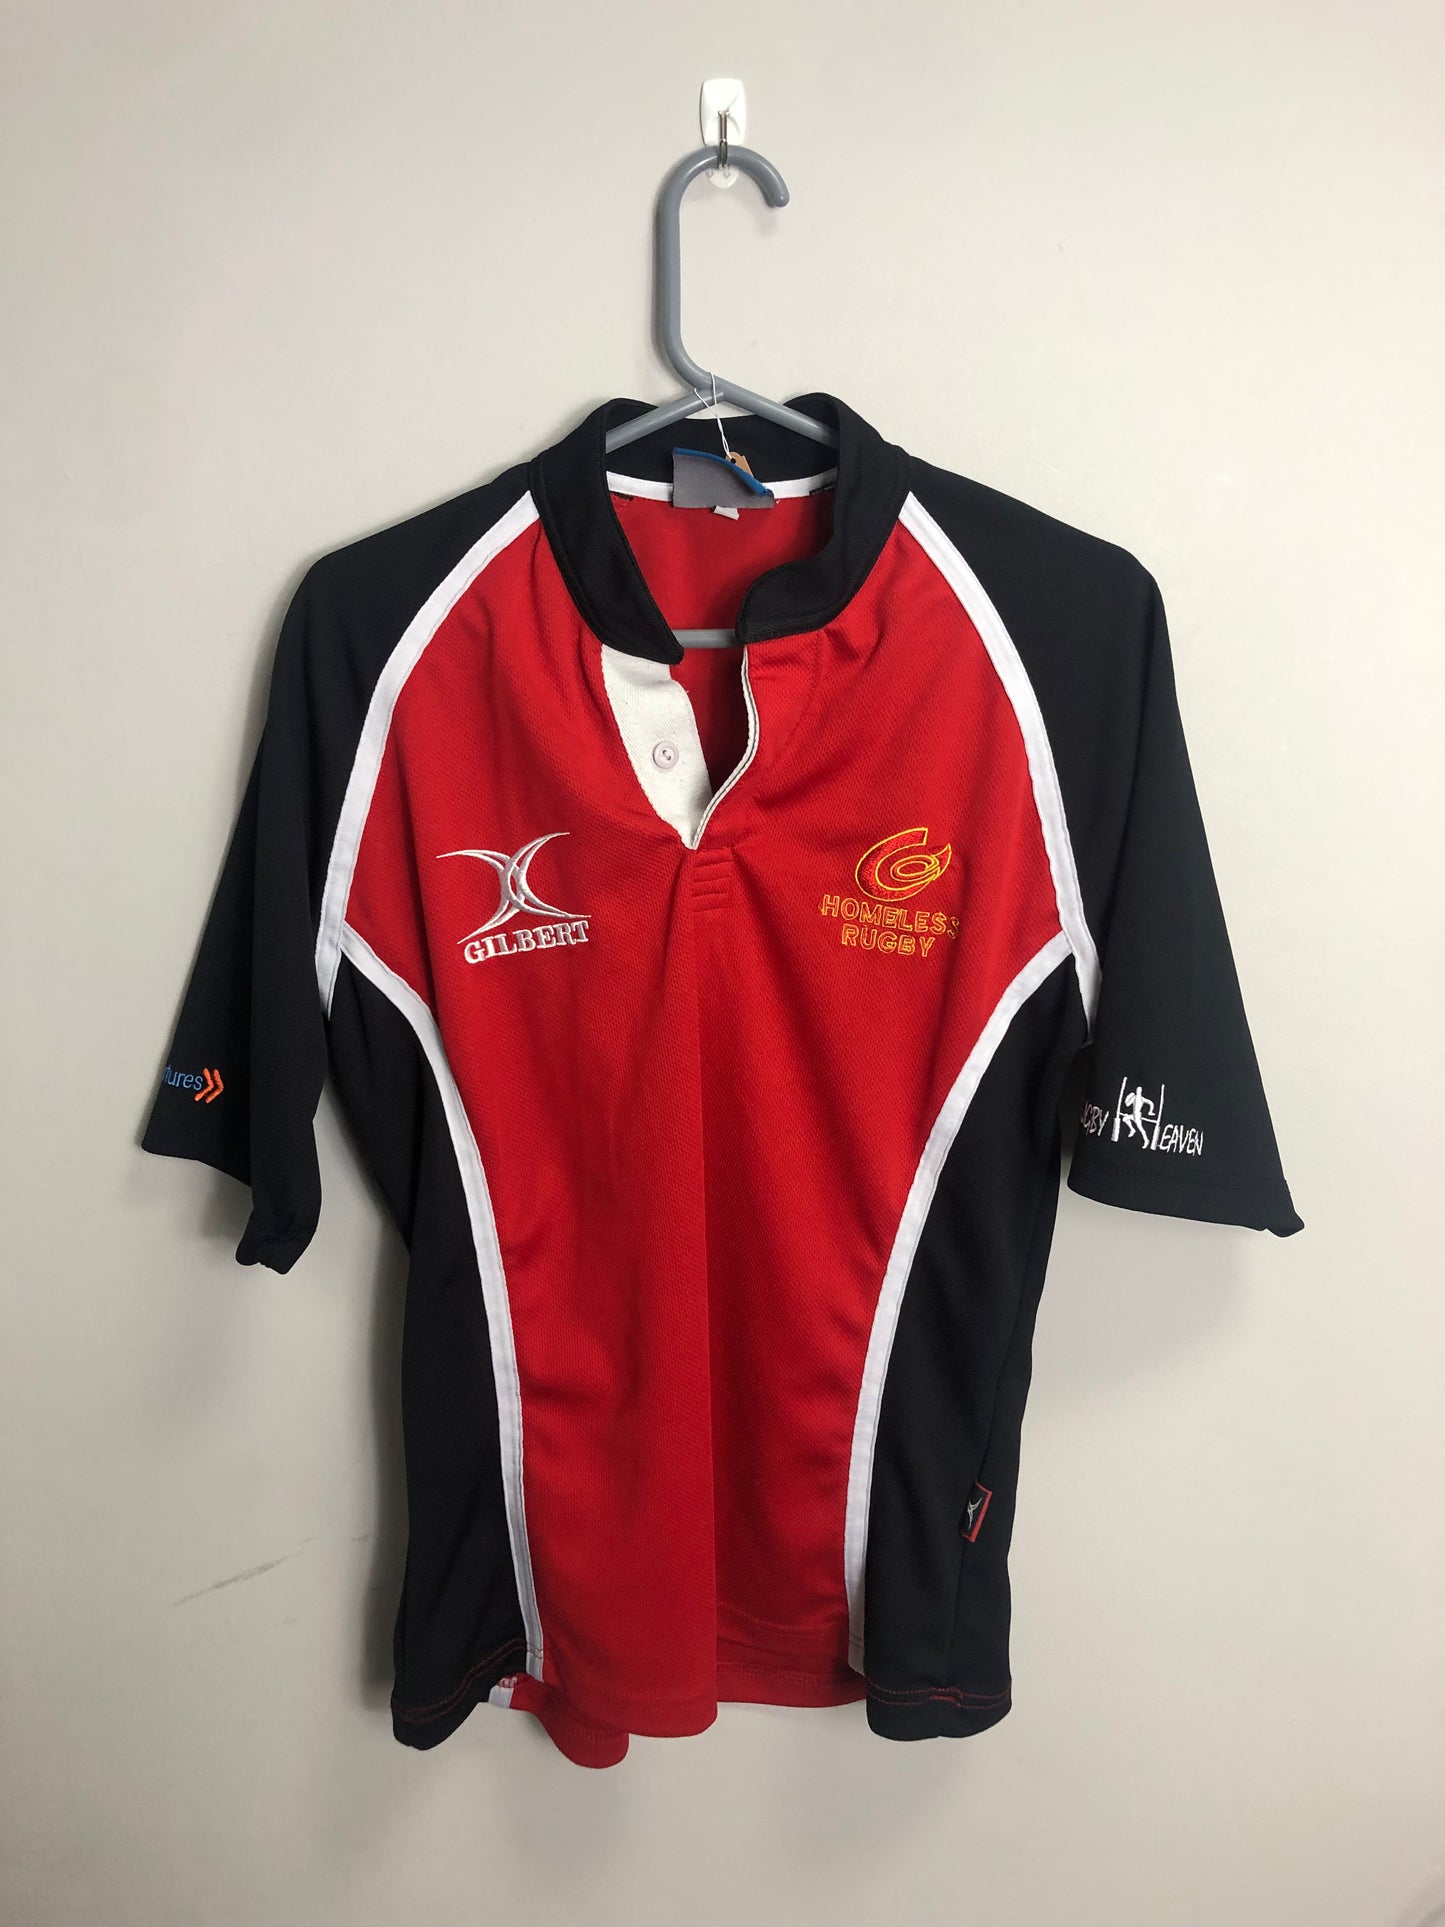 Homeless Rugby Dragons Shirt - #9 - 40” Chest